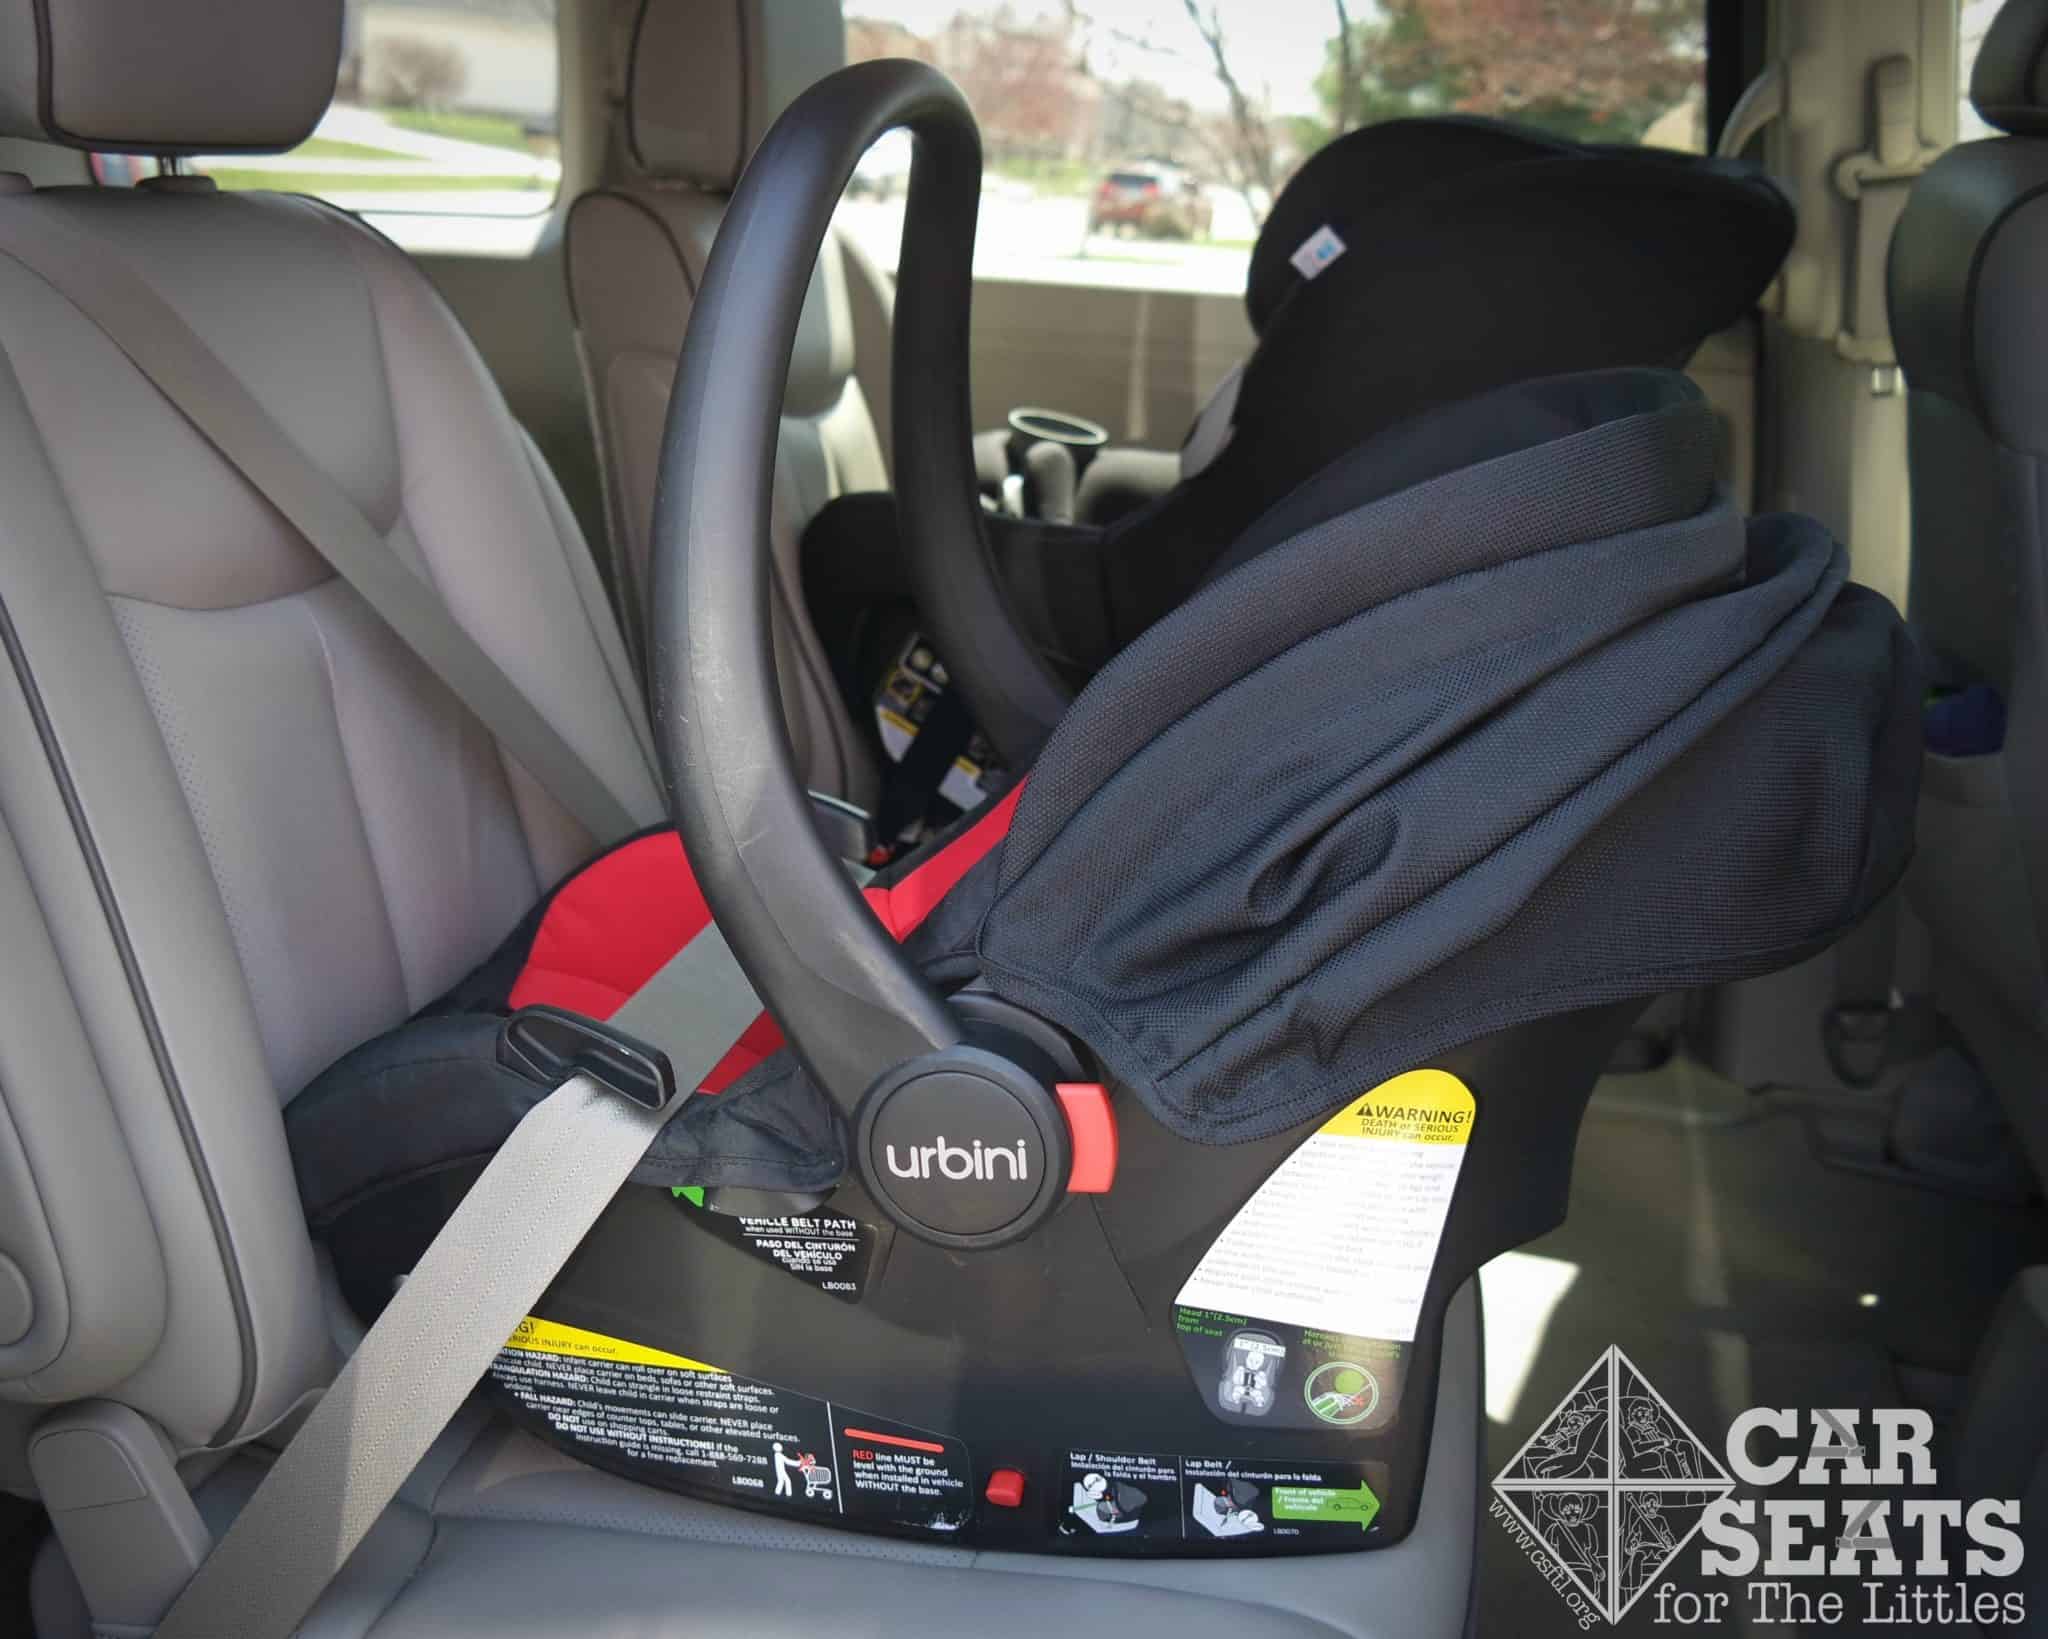 Rear Facing Only Seat Without The Base, How To Become Certified Install Car Seats